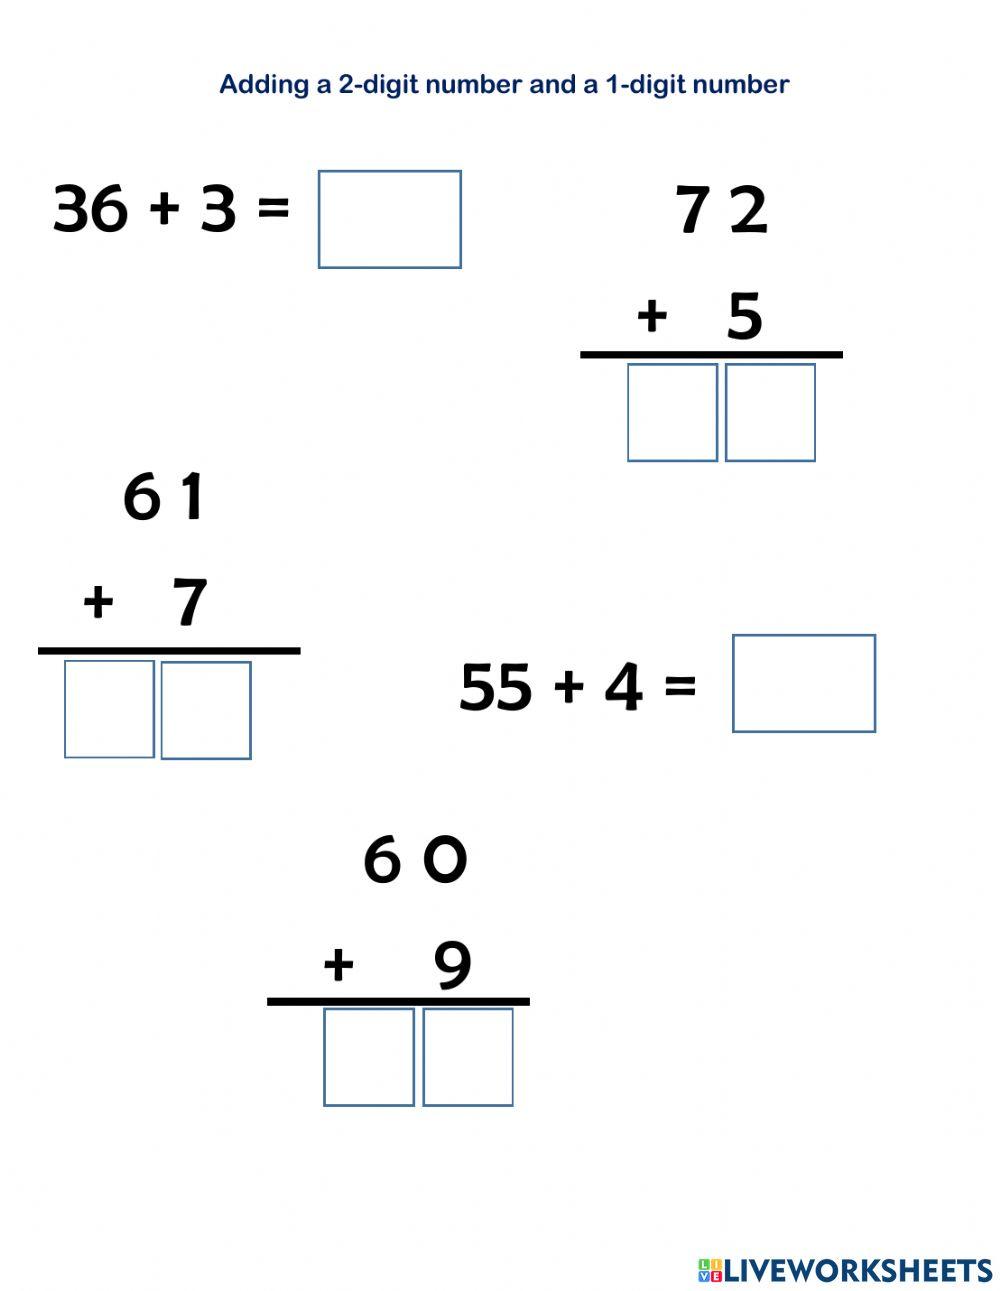 adding-a-2-digit-number-and-a-1-digit-number-interactive-worksheet